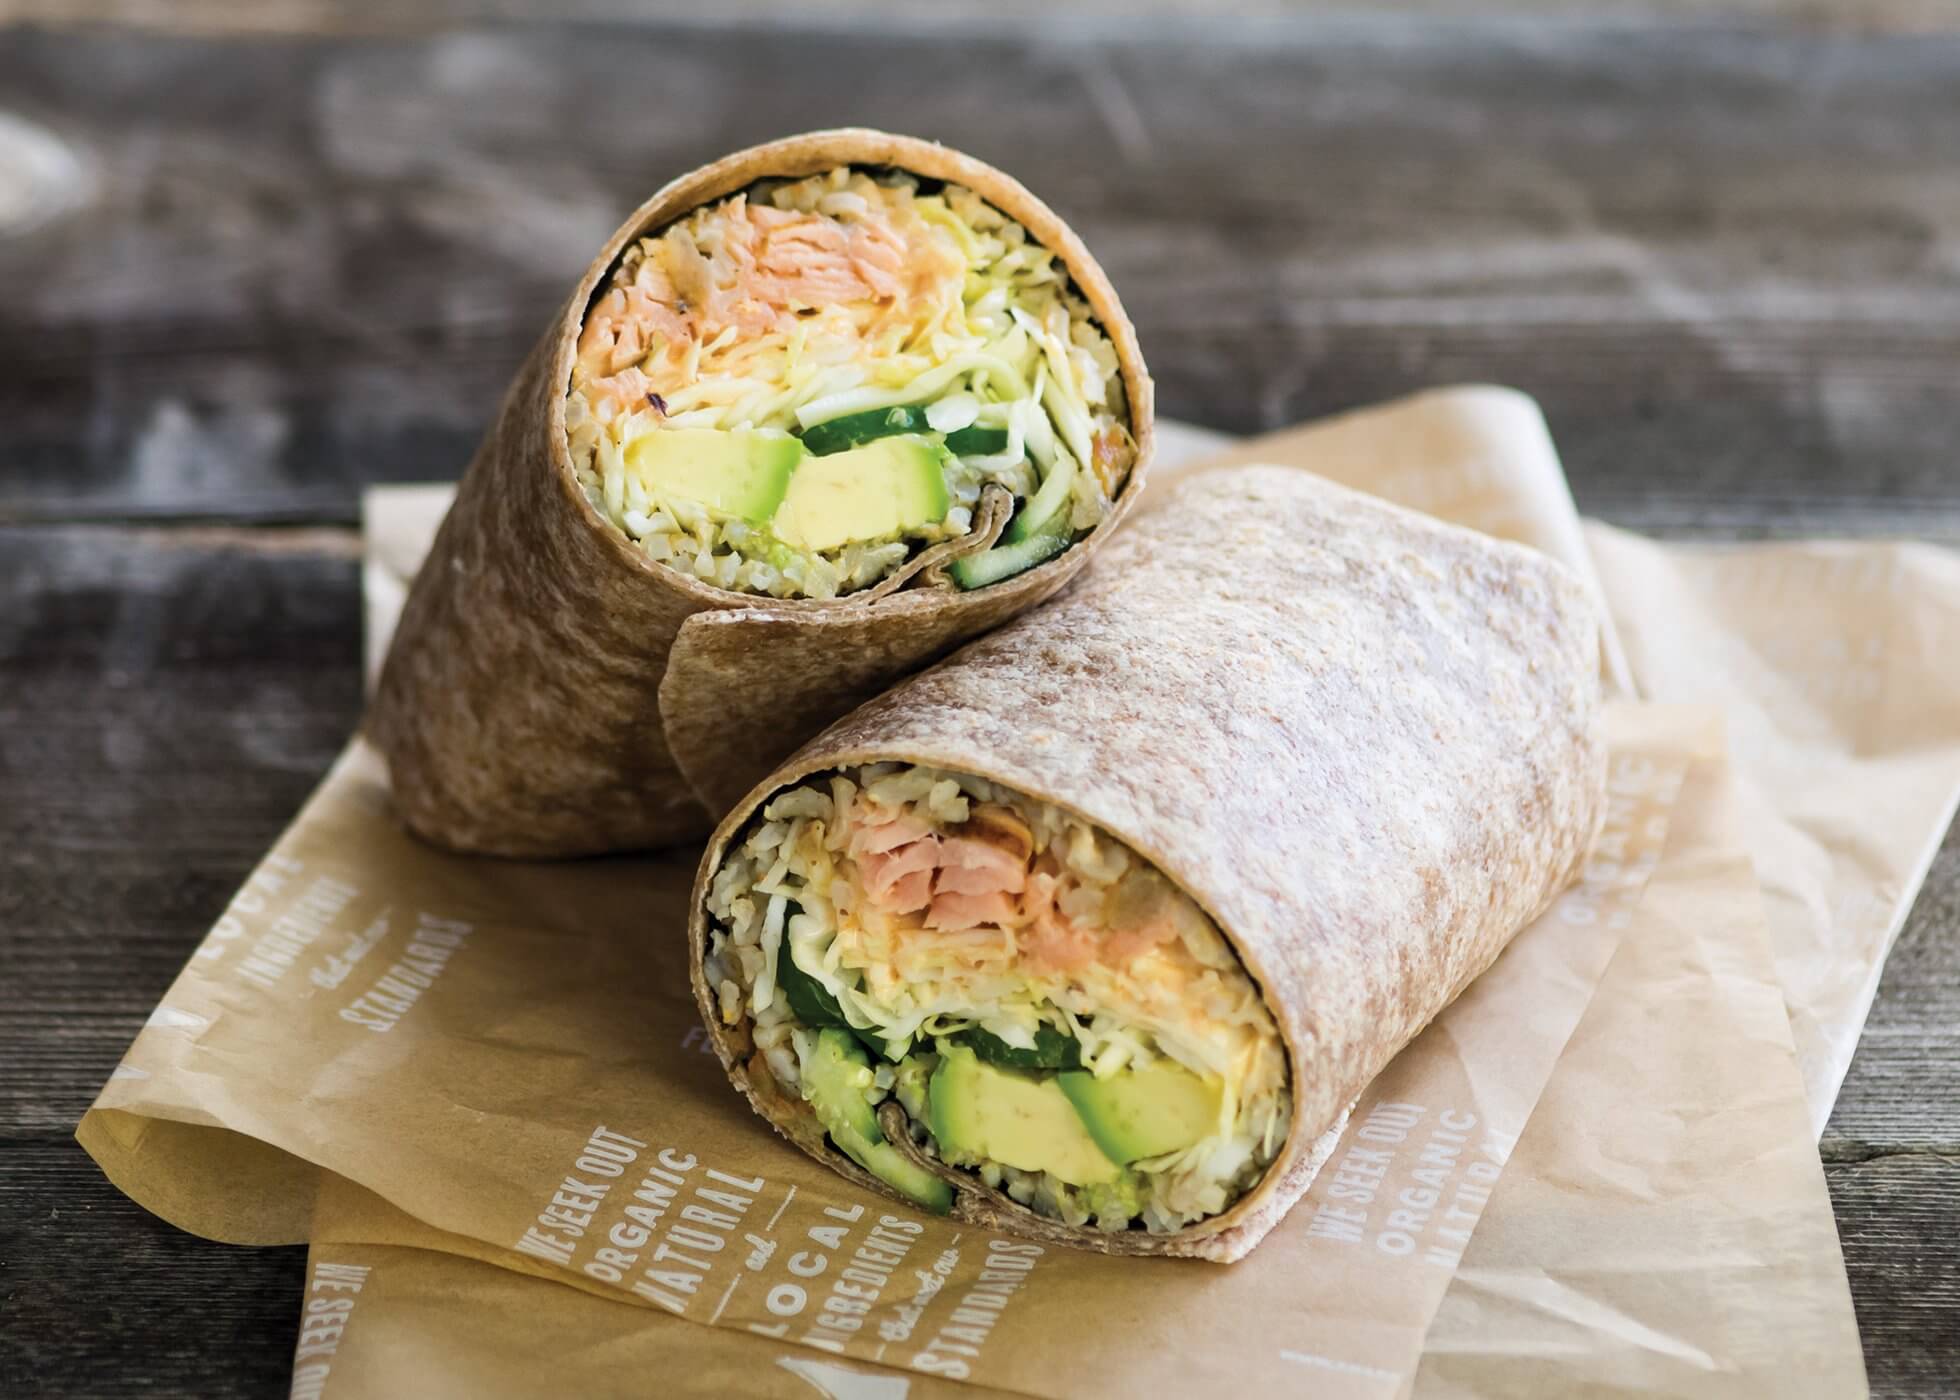 <span class="entry-title-primary">Sushi Burrito</span> <span class="entry-subtitle">Sharky’s Woodfired Mexican Grill Based in Westlake Village, Calif.</span>